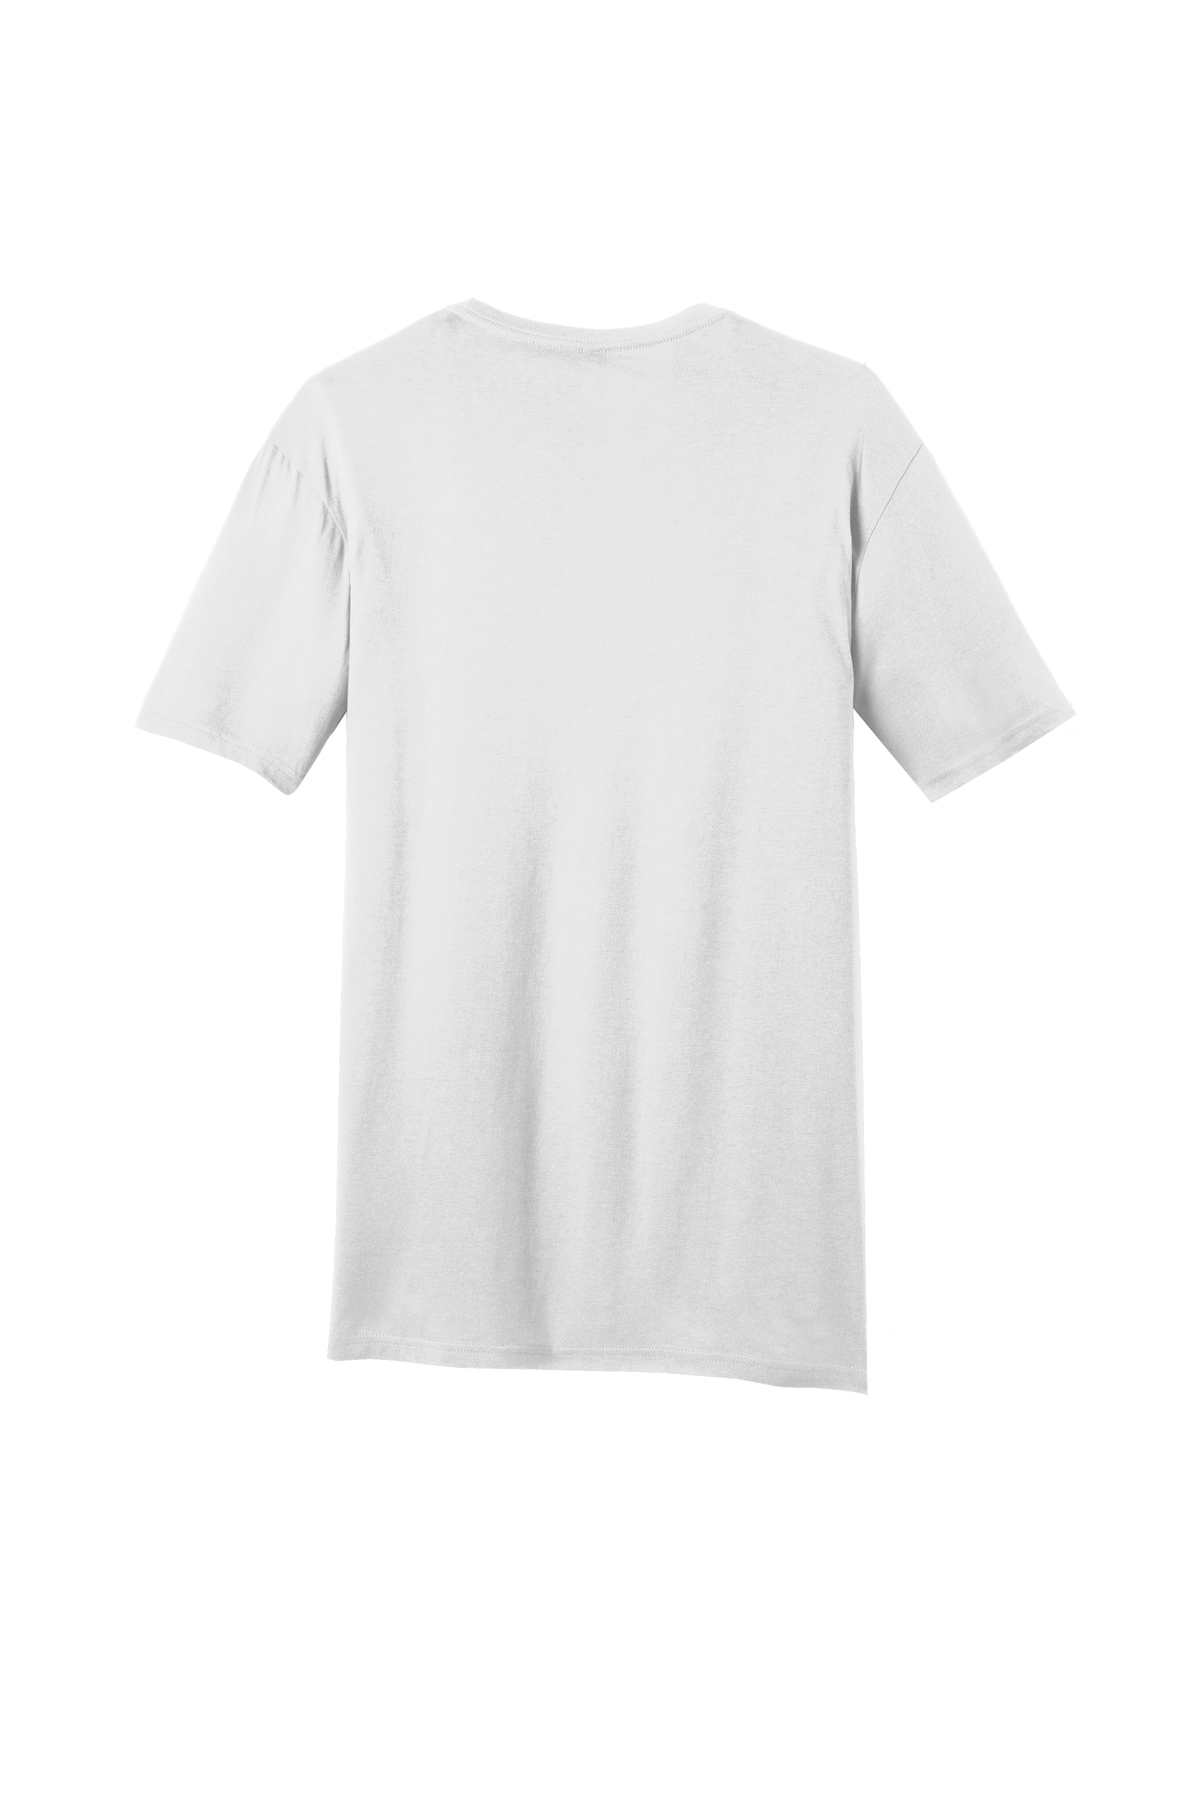 District Young Mens Soft Wash Crew Tee | Product | SanMar